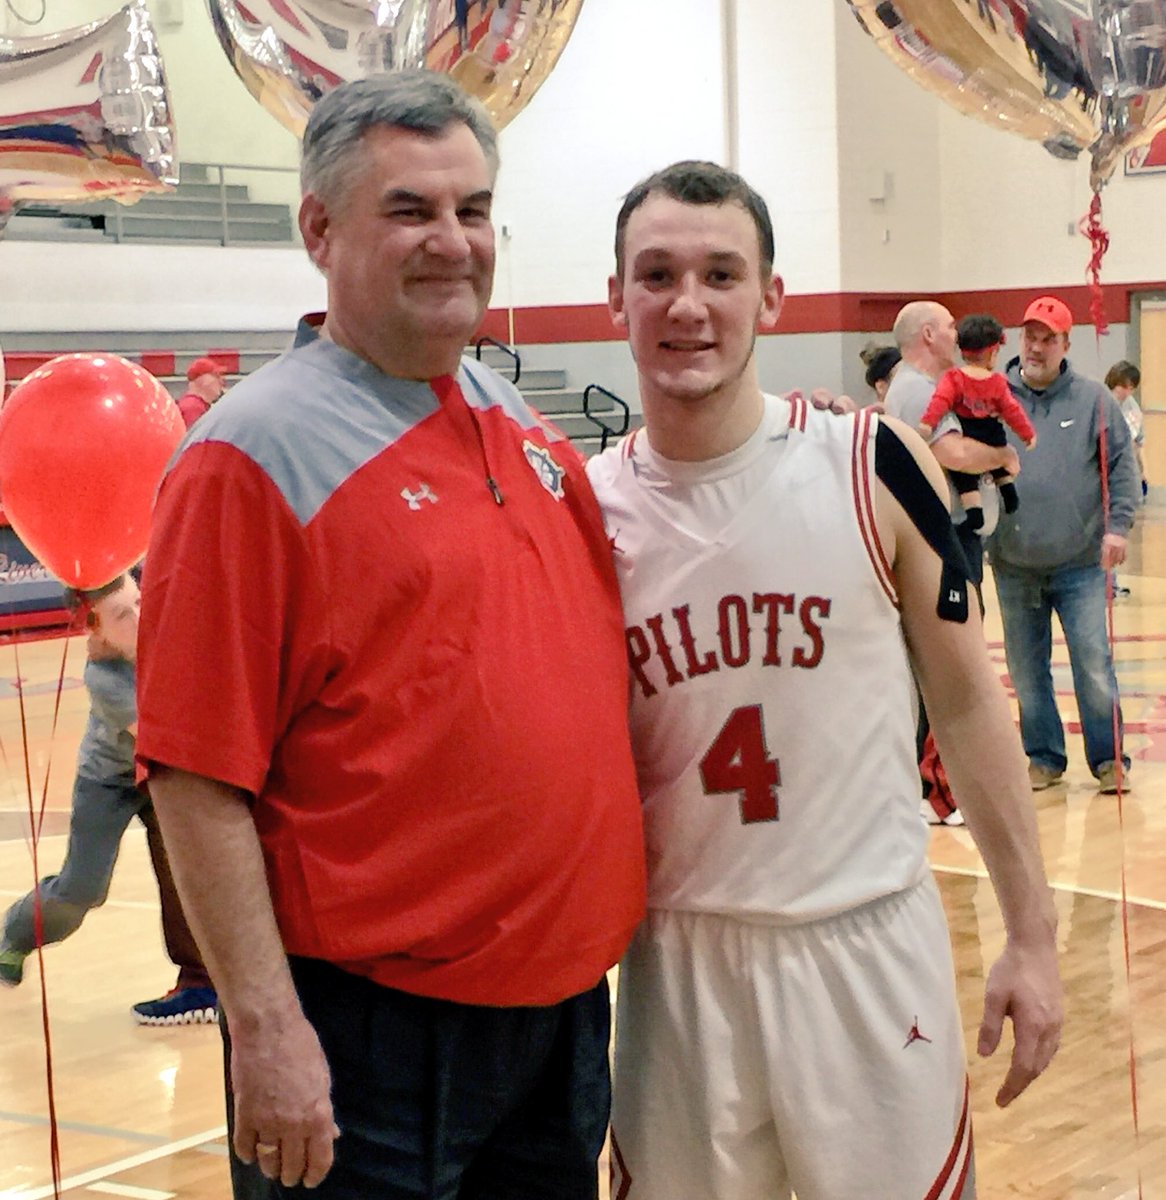 Congratulations to @l_isaly4 on surpassing 2000 career points tonight! The @River_Pilots advance to the OVAC Championship on Saturday at 10am at OUE! See you there! #RaisedByRiver #RiverPilots #2000CareerPoints #WeAreRiver